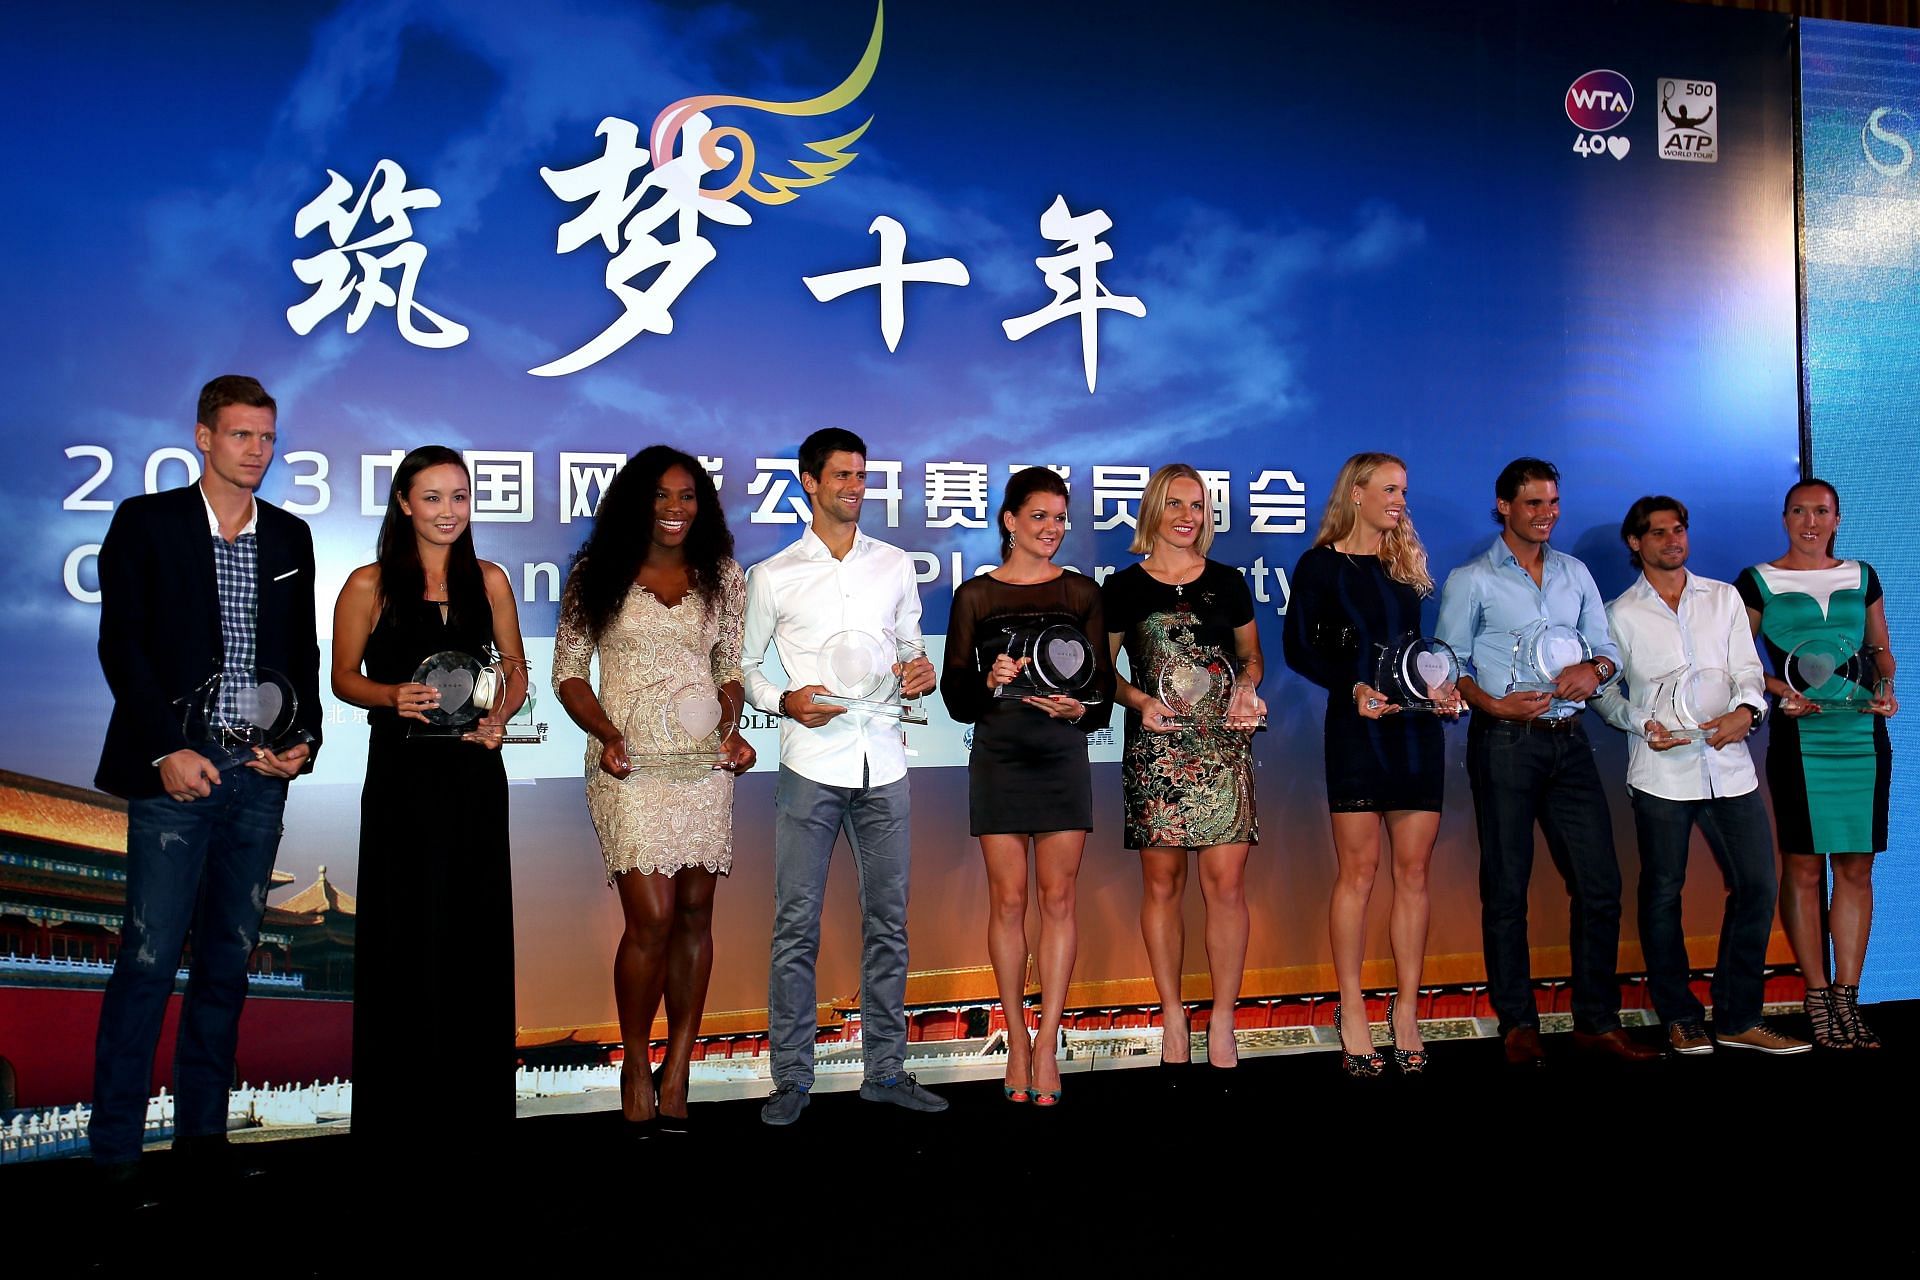 Peng Shuai and Novak Djokovic share the stage among others at the 2013 China Open